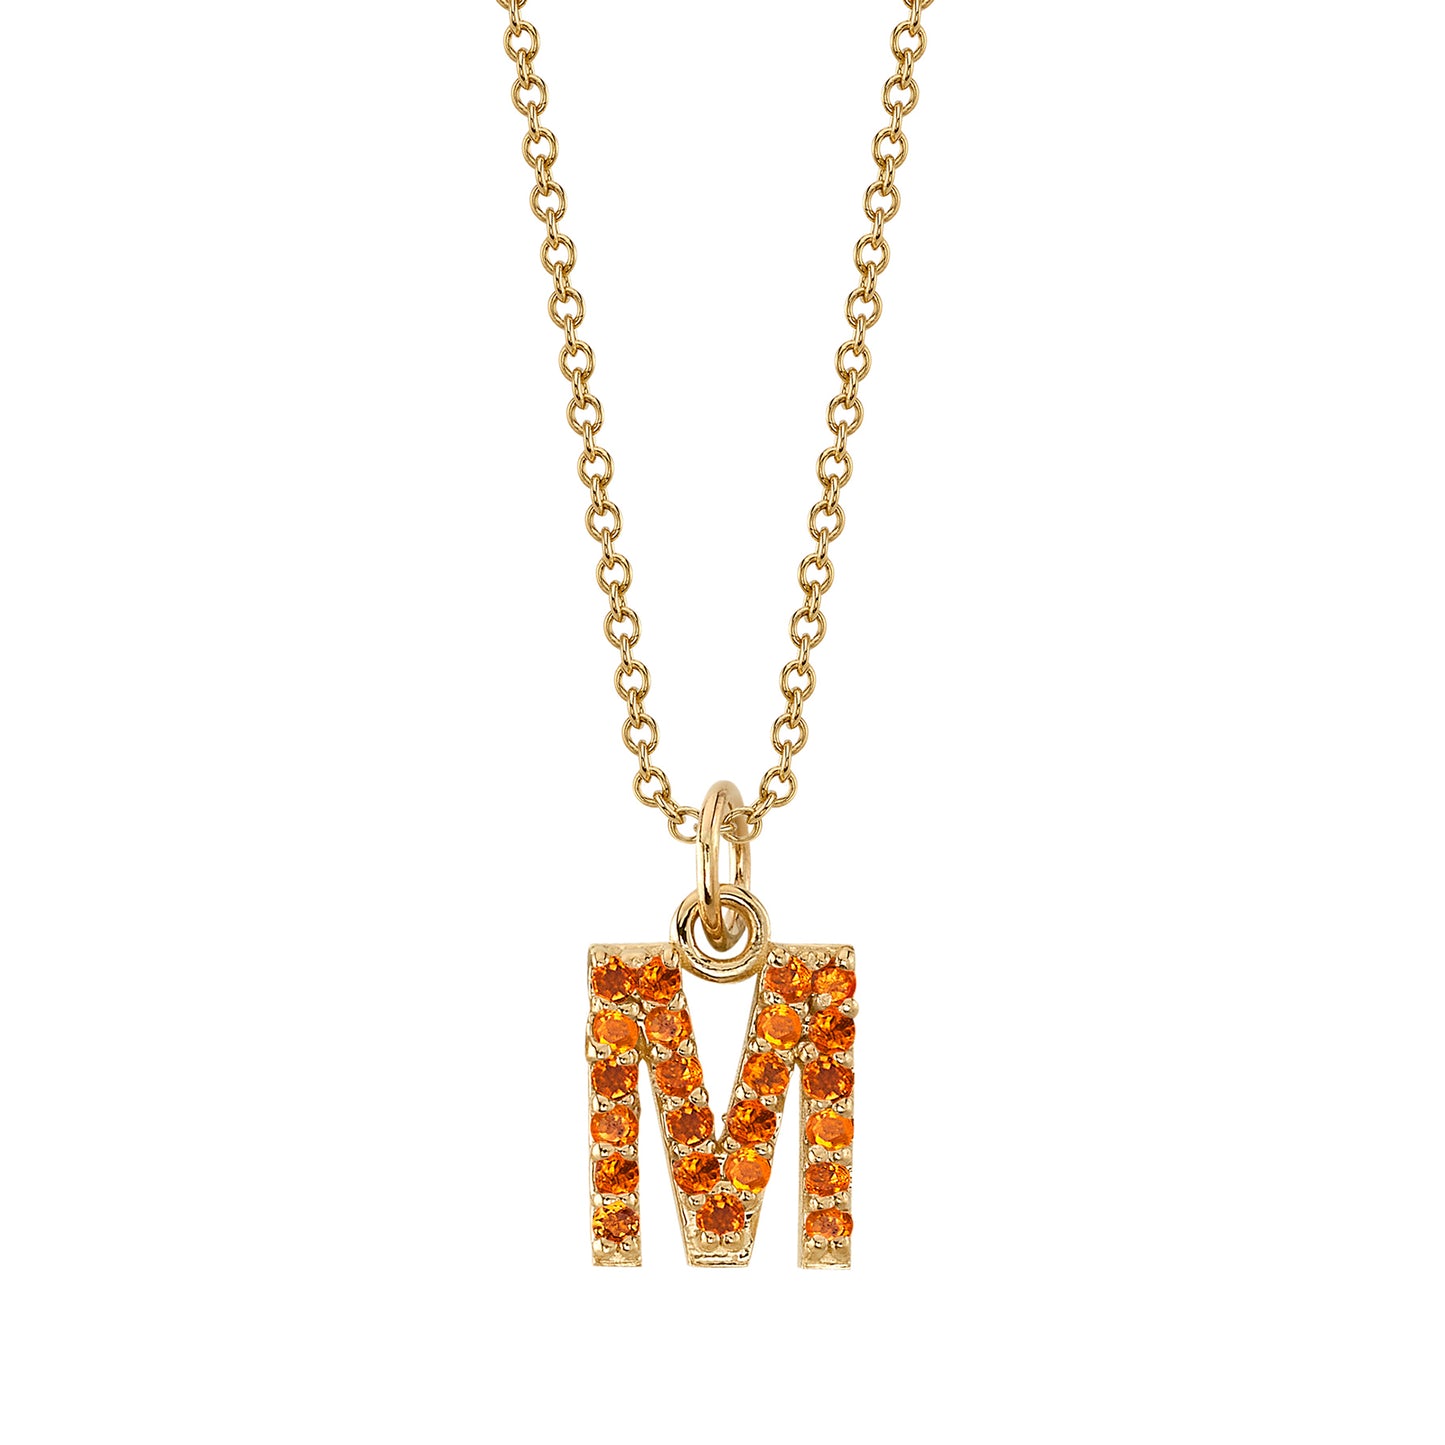 M Initial Birthstone Charm Necklace